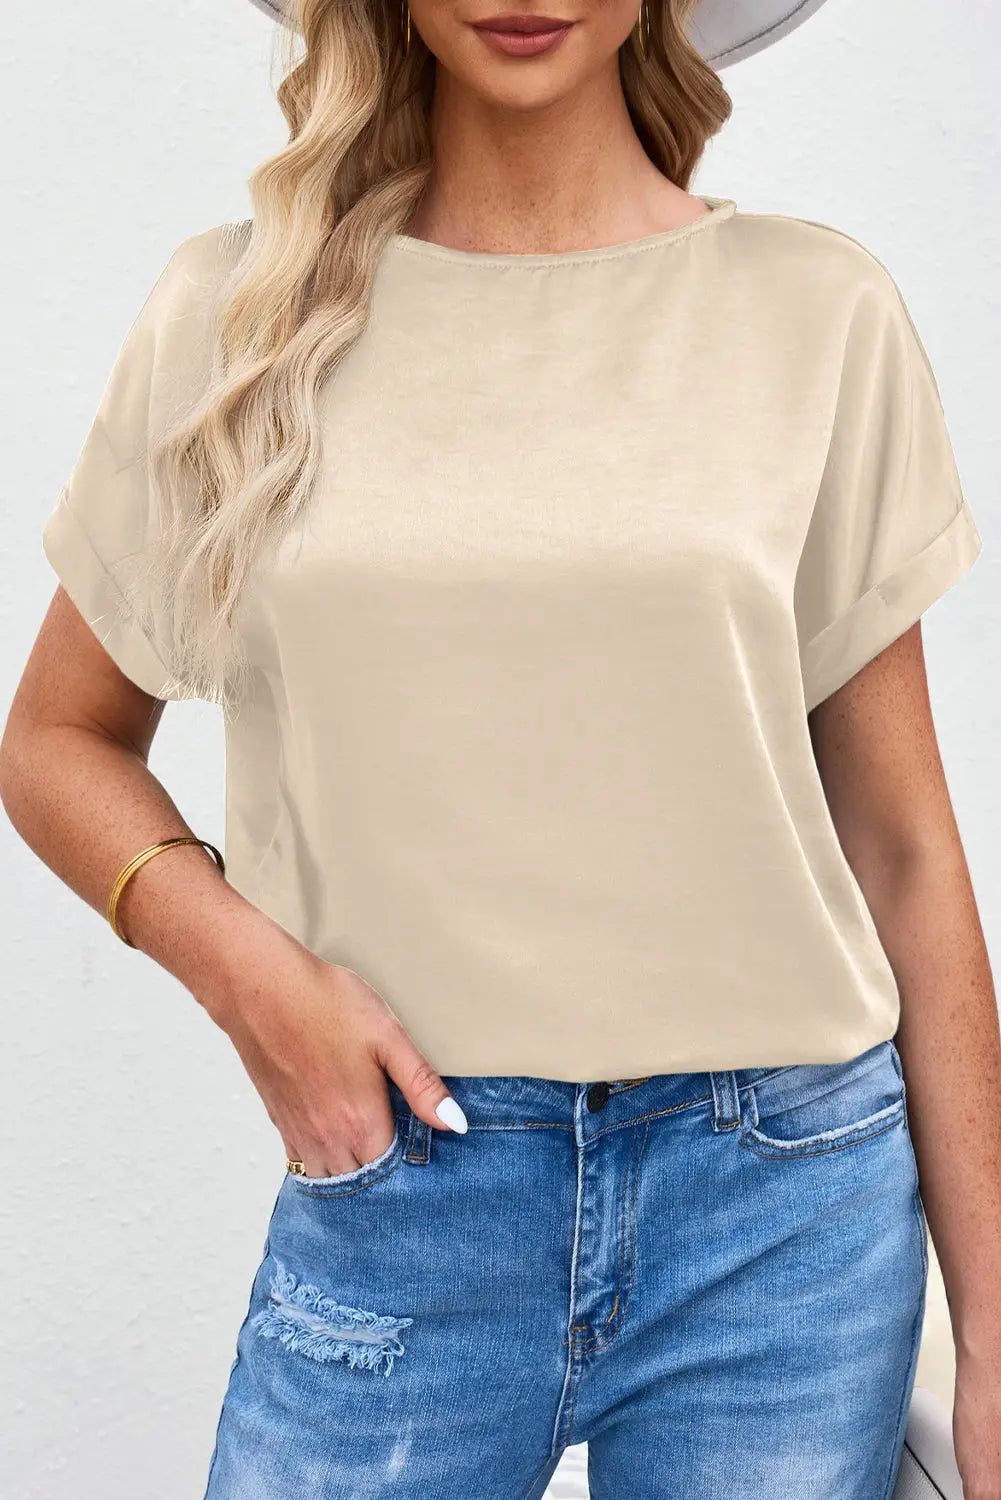 Apricot solid color short sleeve t shirt - tops